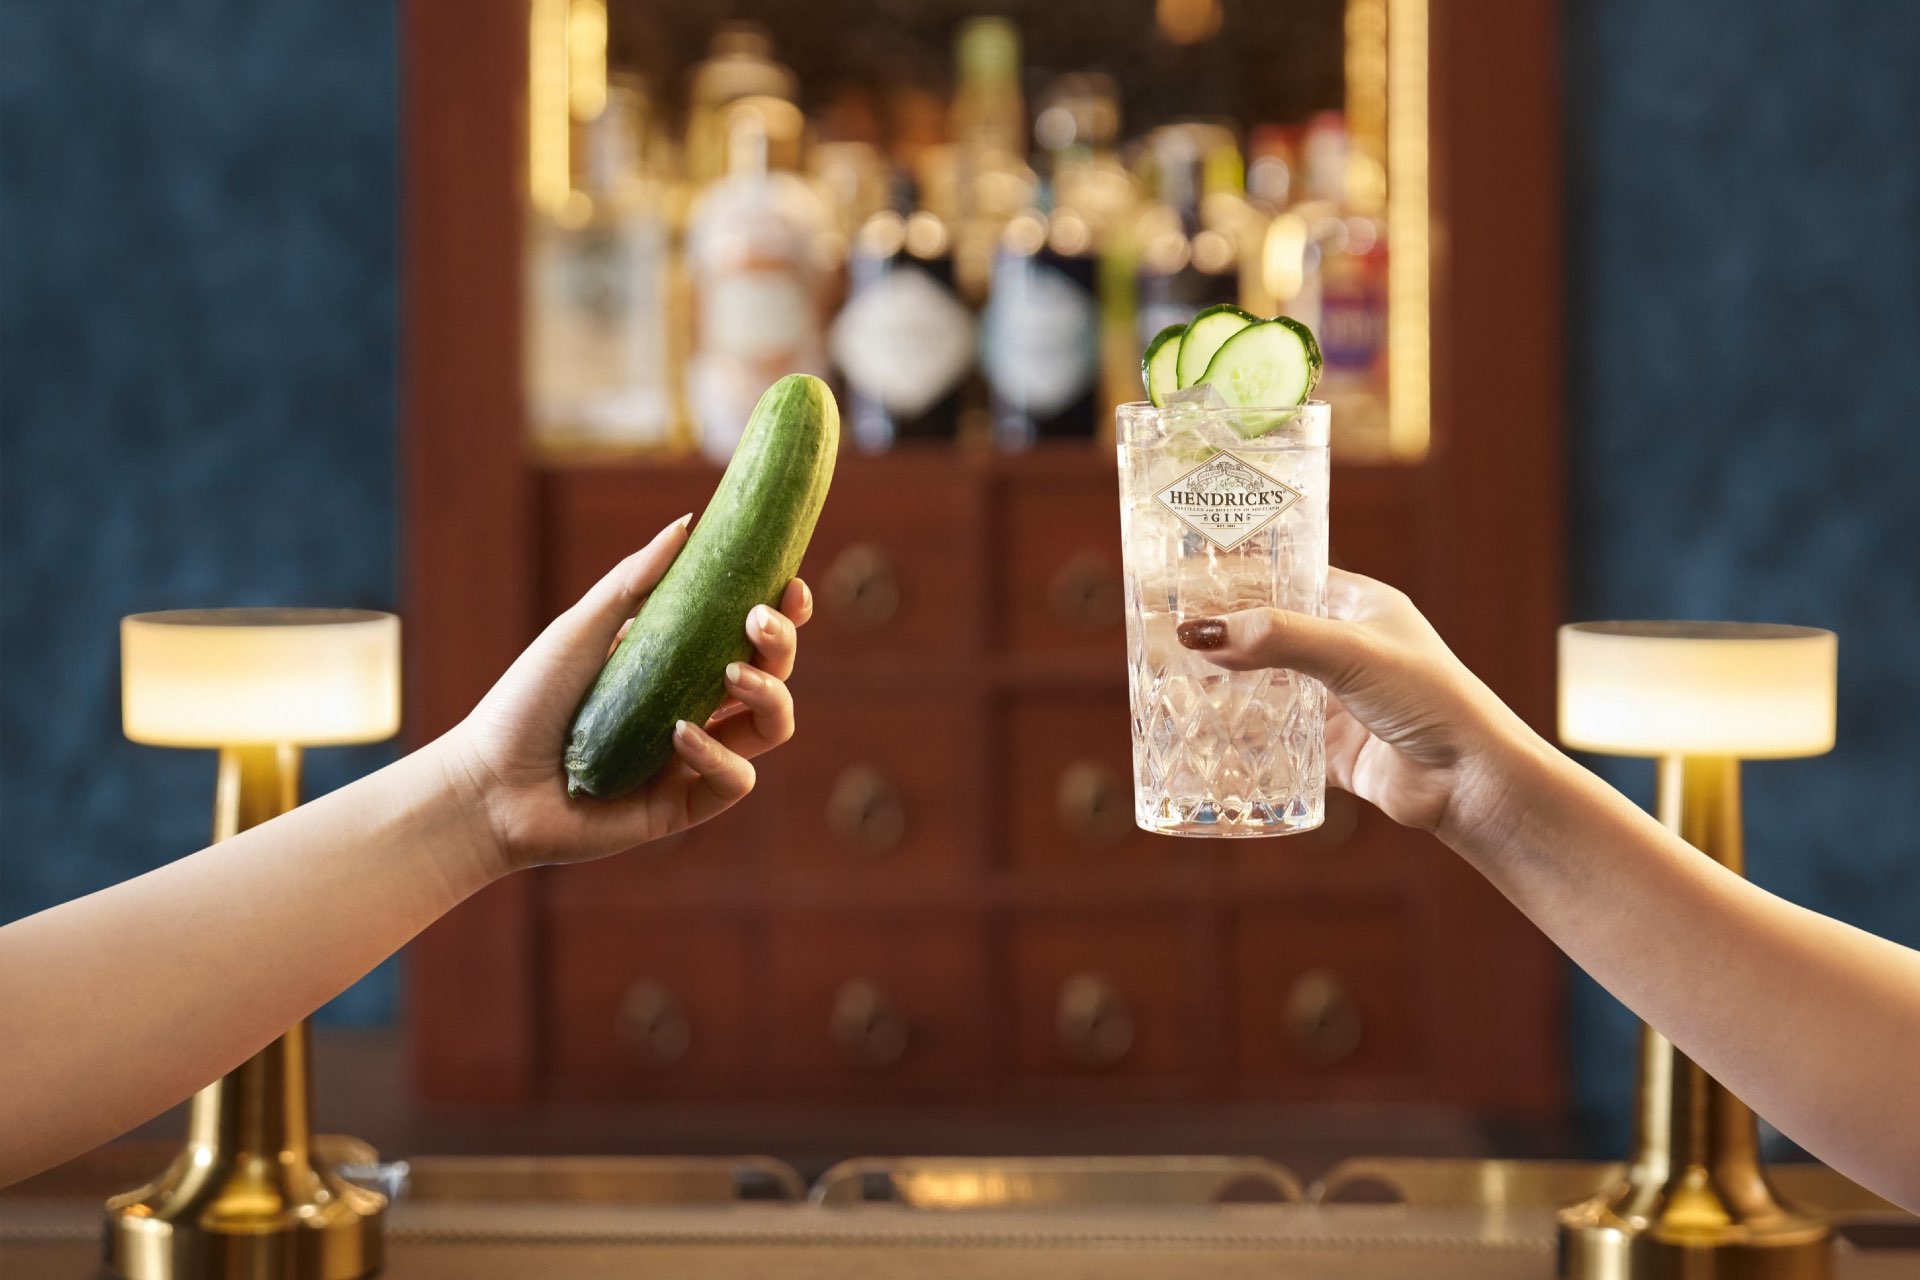 , Exchange cucumbers for Hendrick’s Gin cocktails this World Cucumber Day